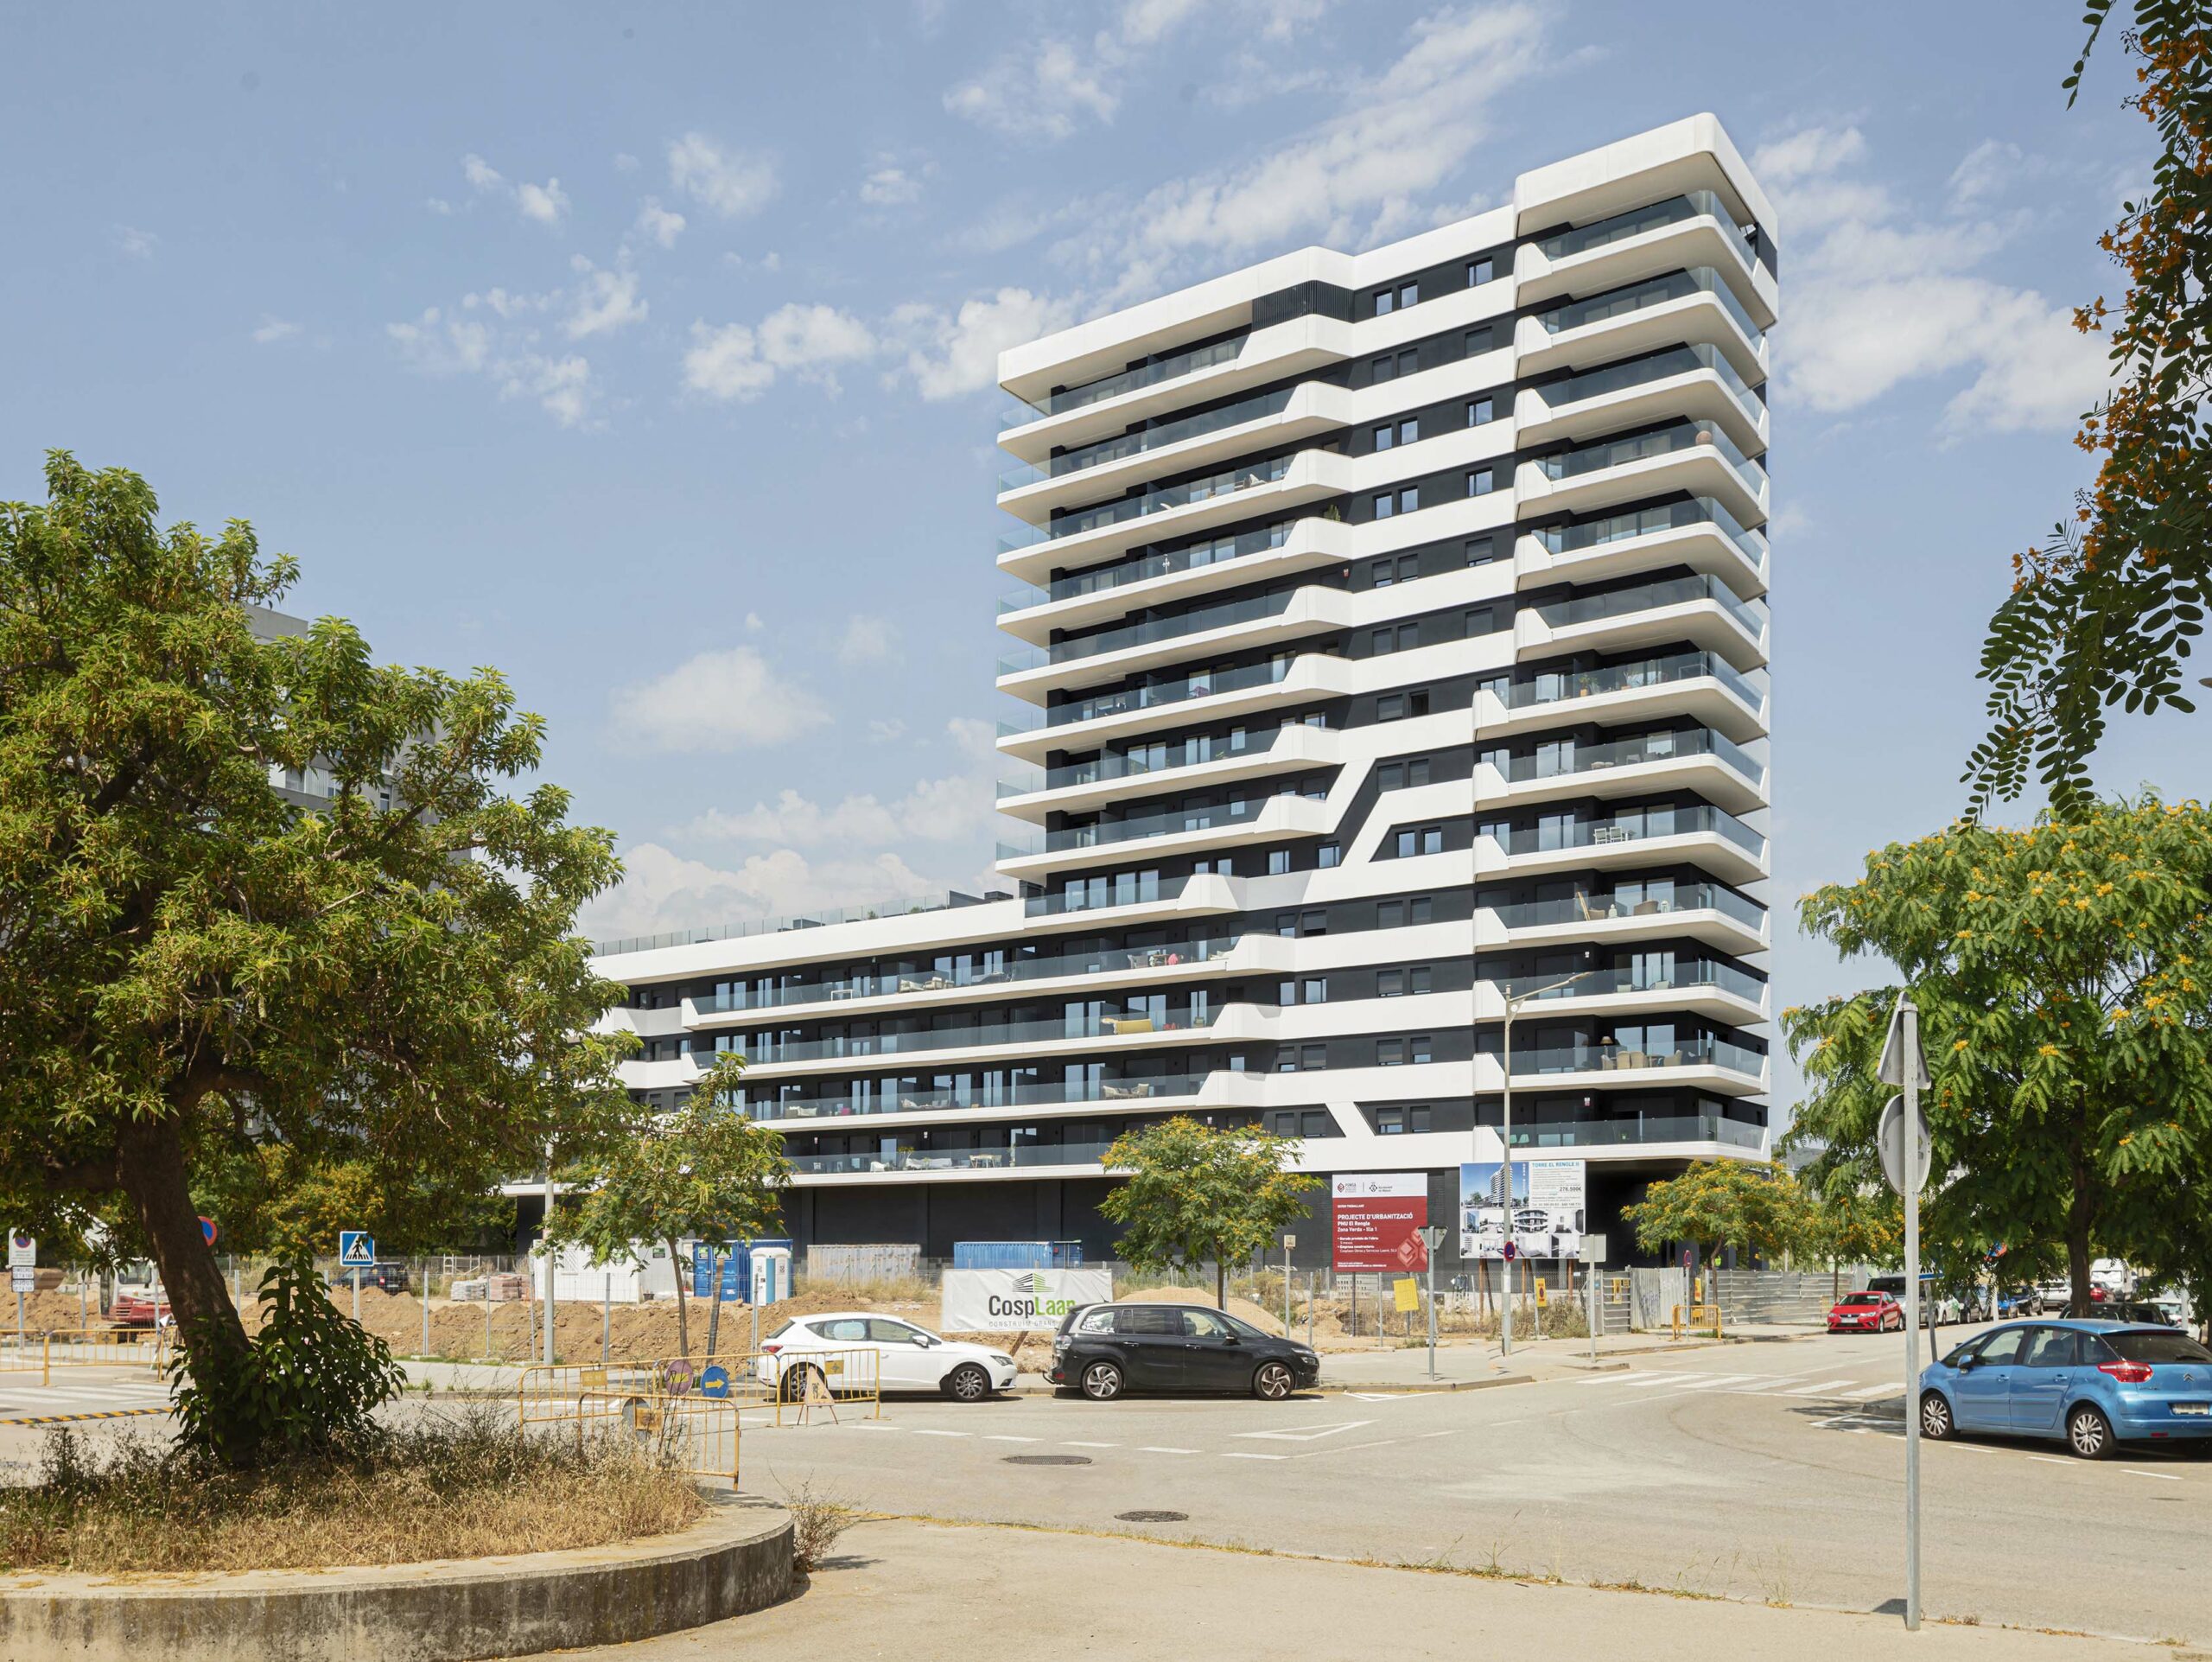  El Rengle Residential II, promoted by Sorigué, is the second project that ON-A develops with the promoter in the Rengle sector of Mataró.